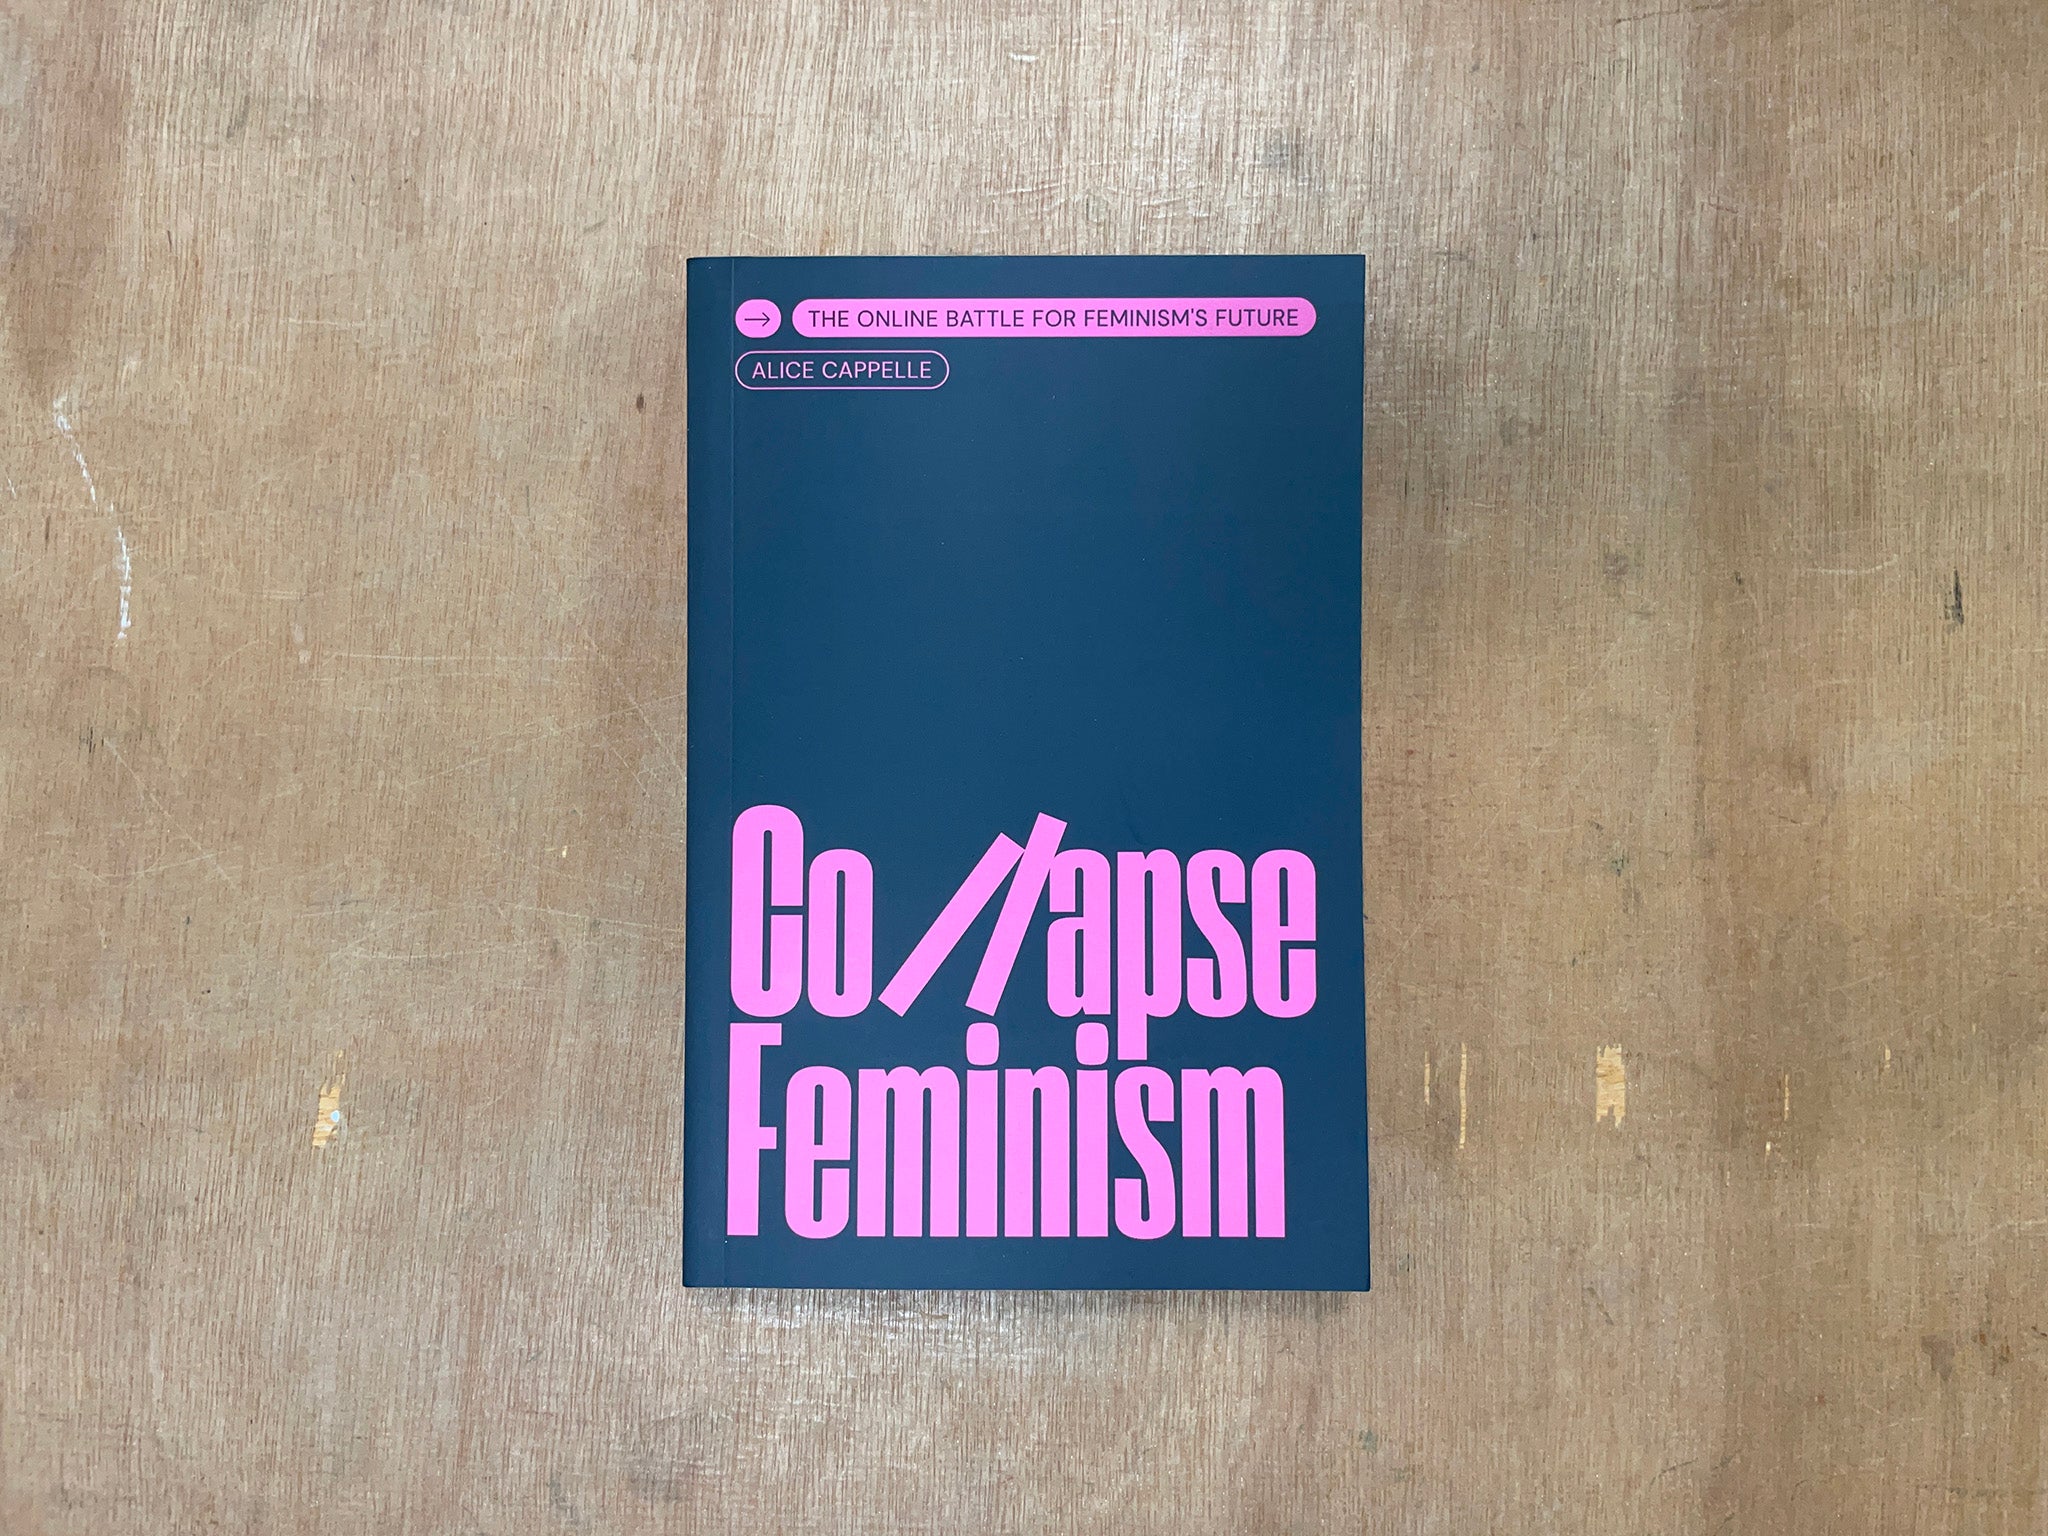 COLLAPSE FEMINISM: THE ONLINE BATTLE FOR FEMINISM’S FUTURE by Alice Cappelle